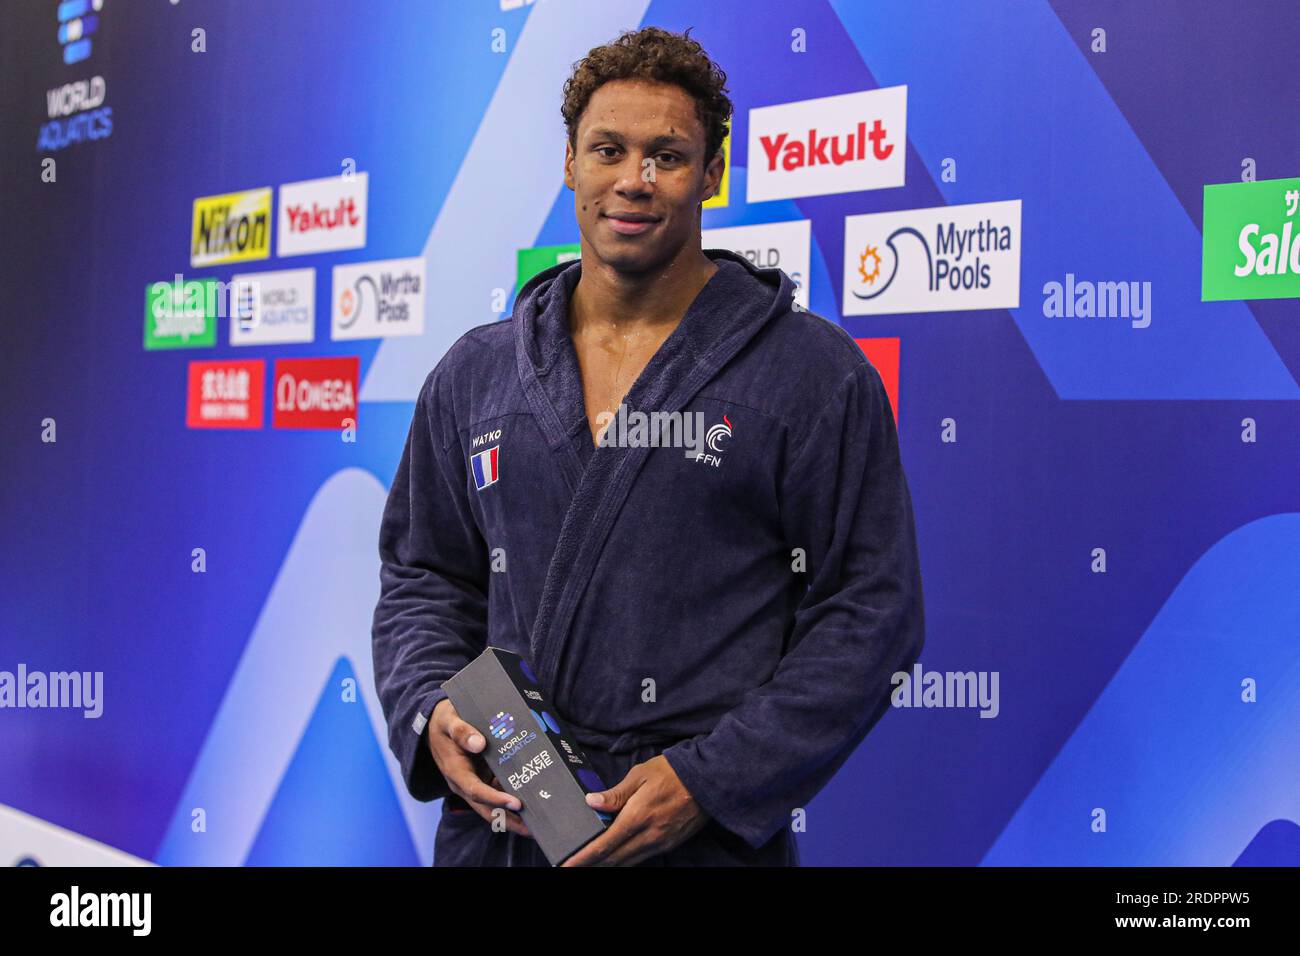 Fukuoka, Japan. 23rd July, 2023. FUKUOKA, JAPAN - JULY 23: Thomas Vernoux of France with his MVP trophy during the World Aquatics Championships 2023 Men's crossover match between Australia and France on July 23, 2023 in Fukuoka, Japan (Photo by Albert ten Hove/Orange Pictures) Credit: Orange Pics BV/Alamy Live News Stock Photo